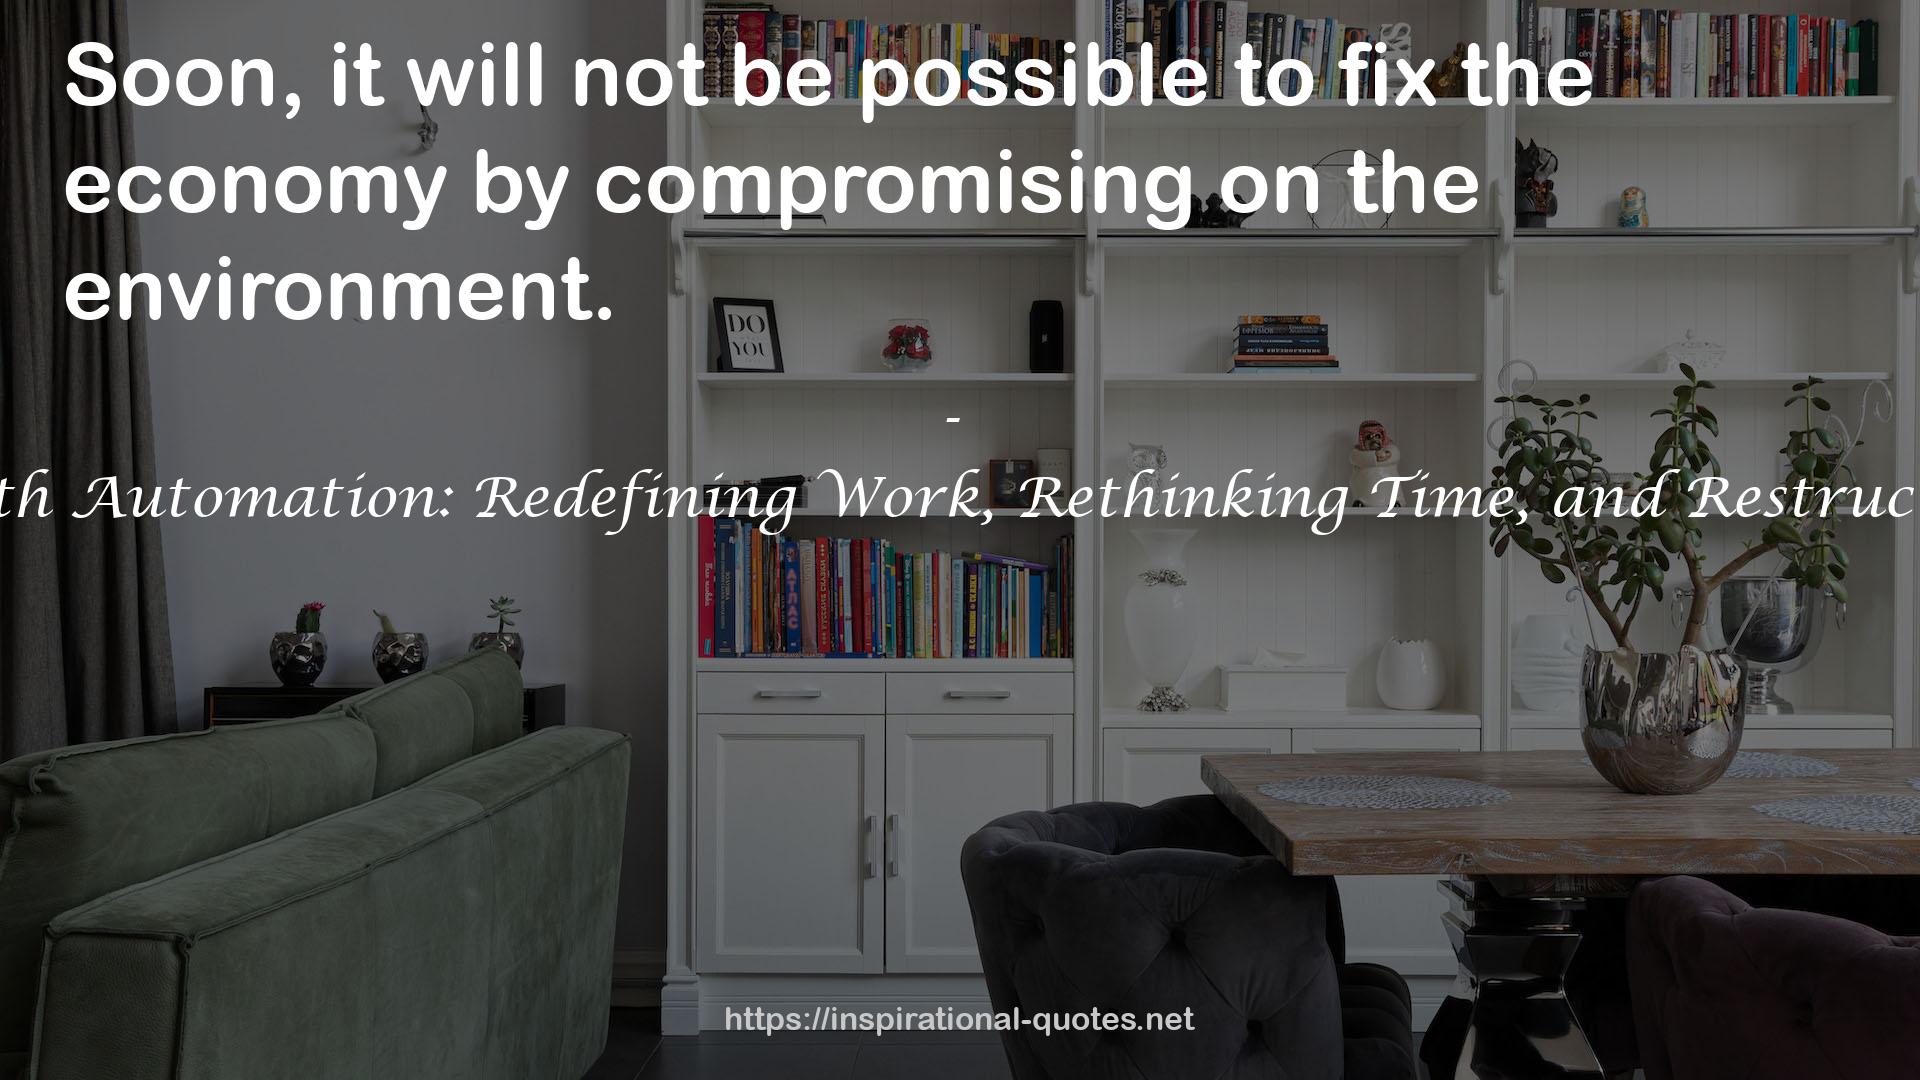 Redesigning Life with Automation: Redefining Work, Rethinking Time, and Restructuring Consumption QUOTES